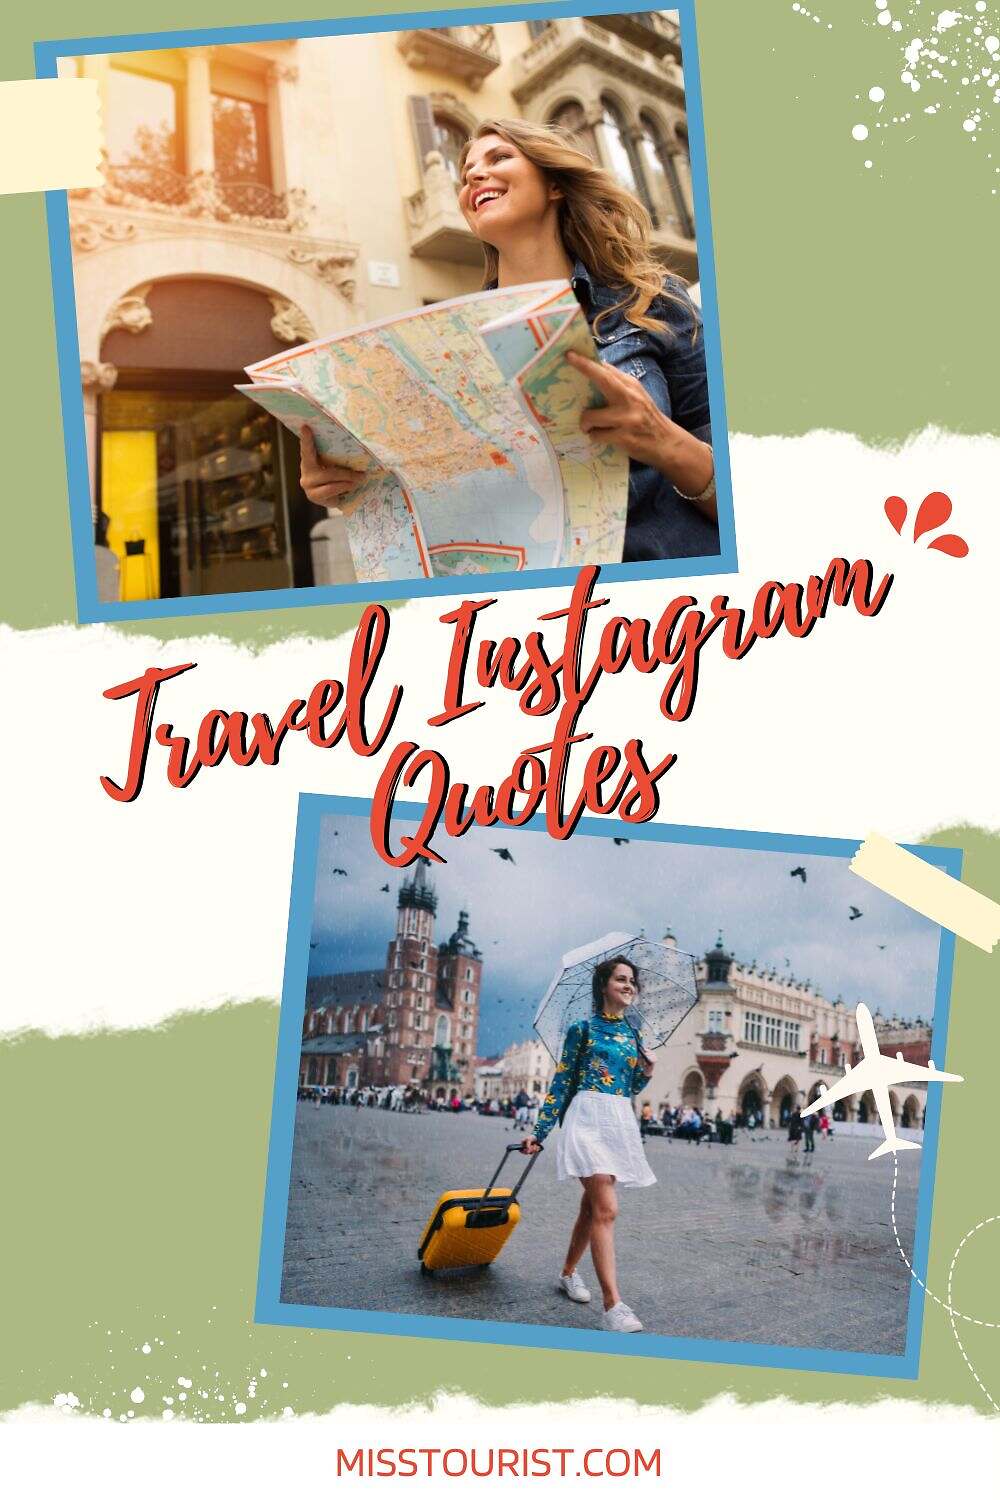 Collage with a woman holding a map and another woman walking with a suitcase, overlaid with text "Travel Instagram Quotes" and the website "MISSTOURIST.COM".